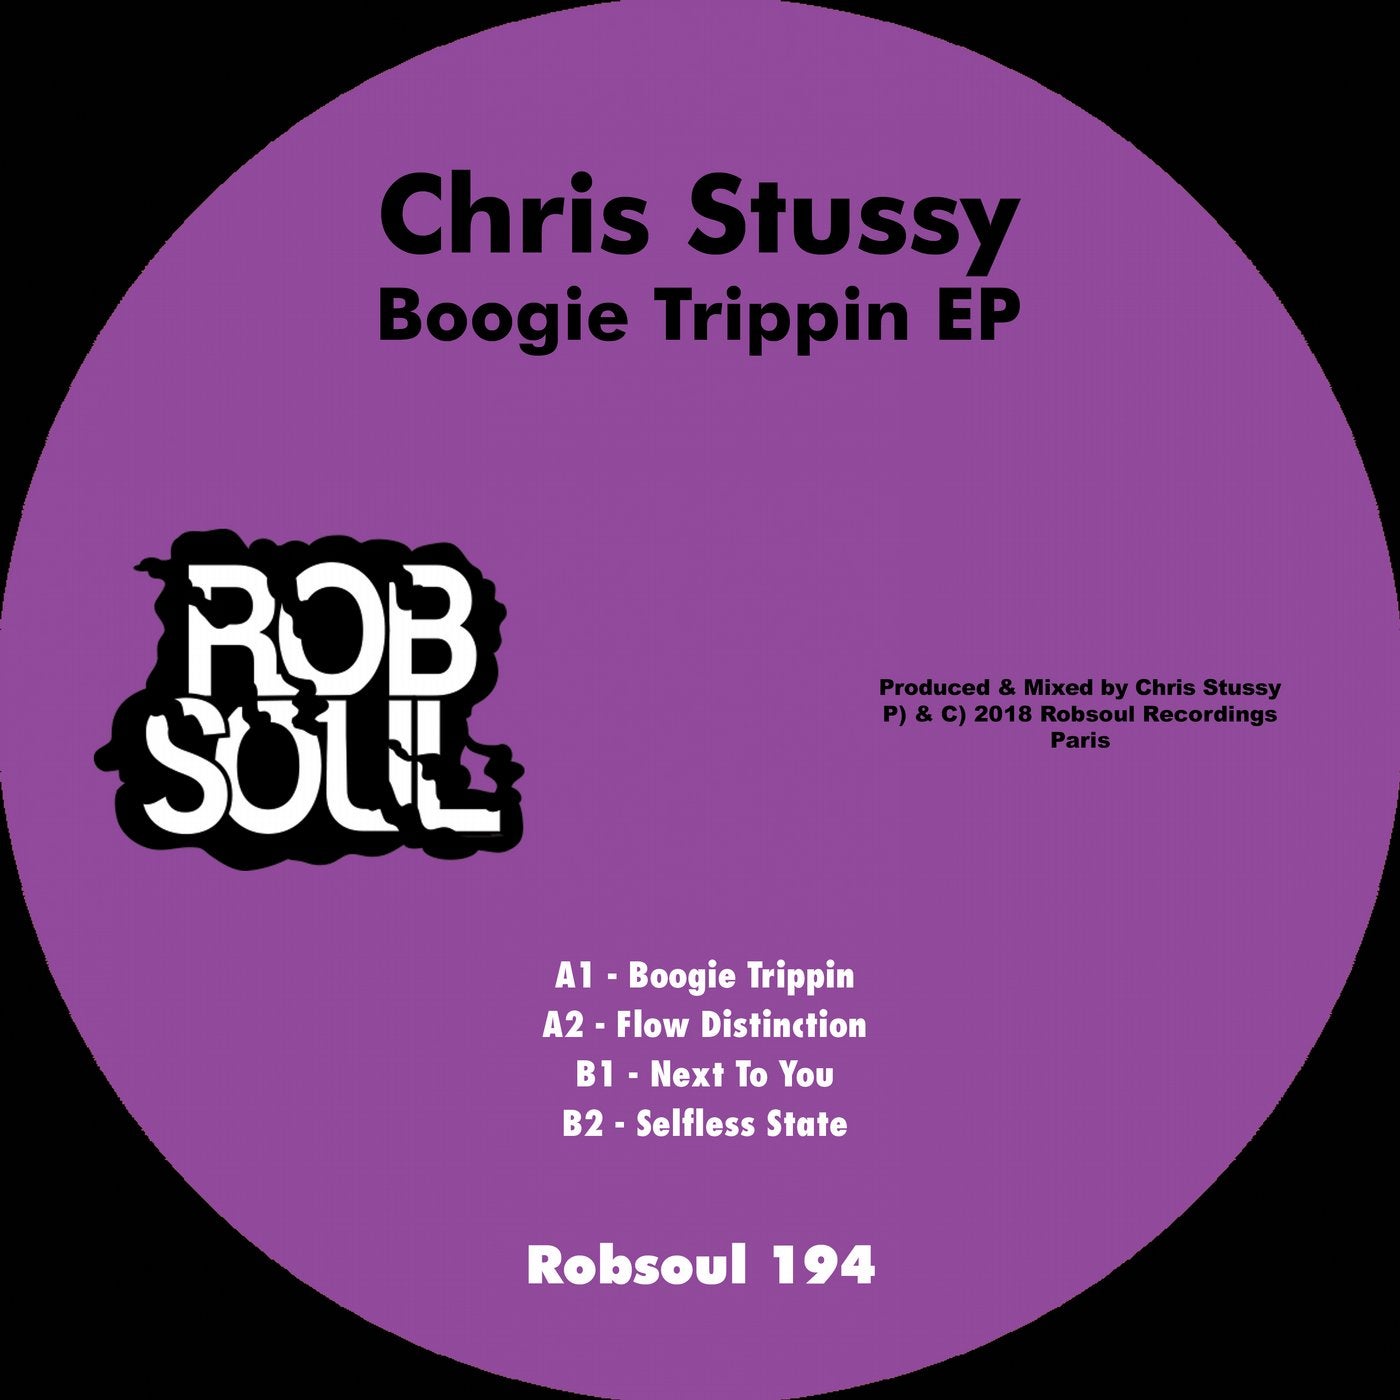 Boogie Trippin EP